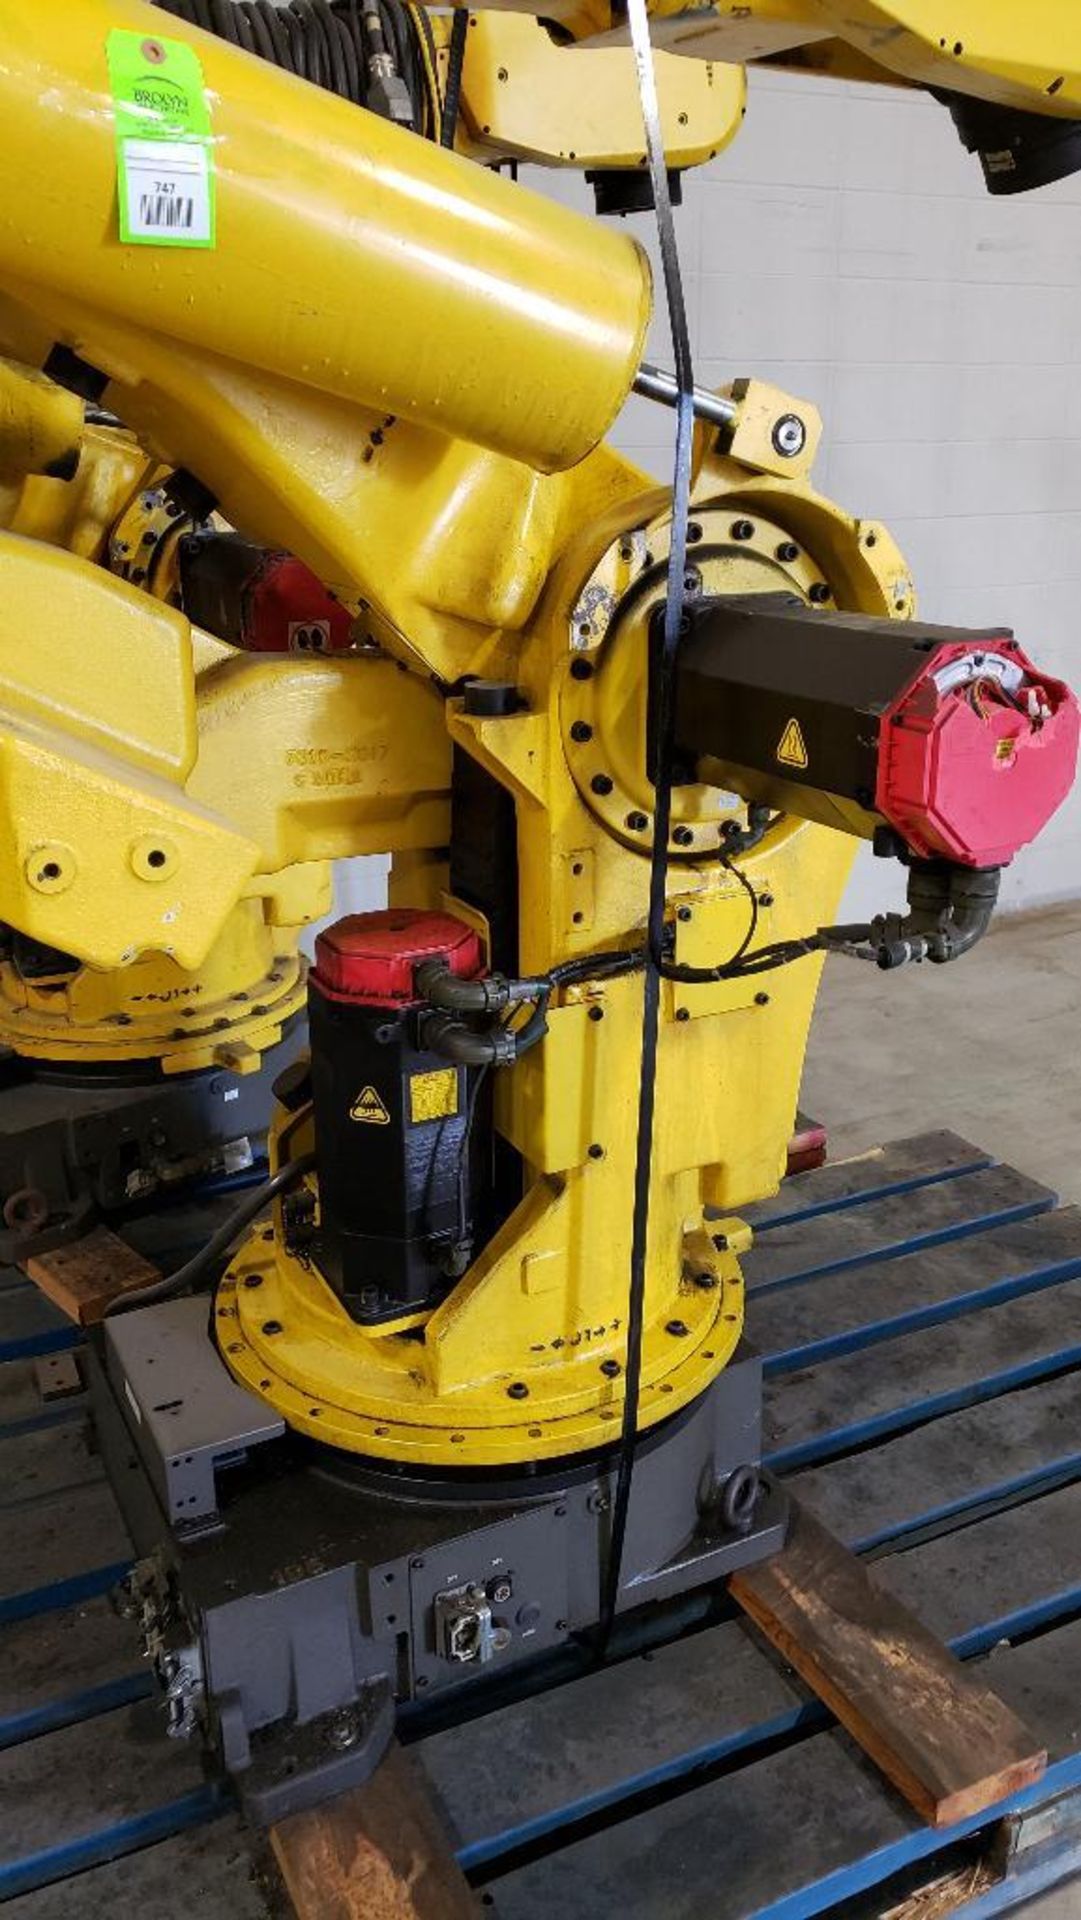 Fanuc S-420iW robot 6-axis arm. - Image 5 of 7